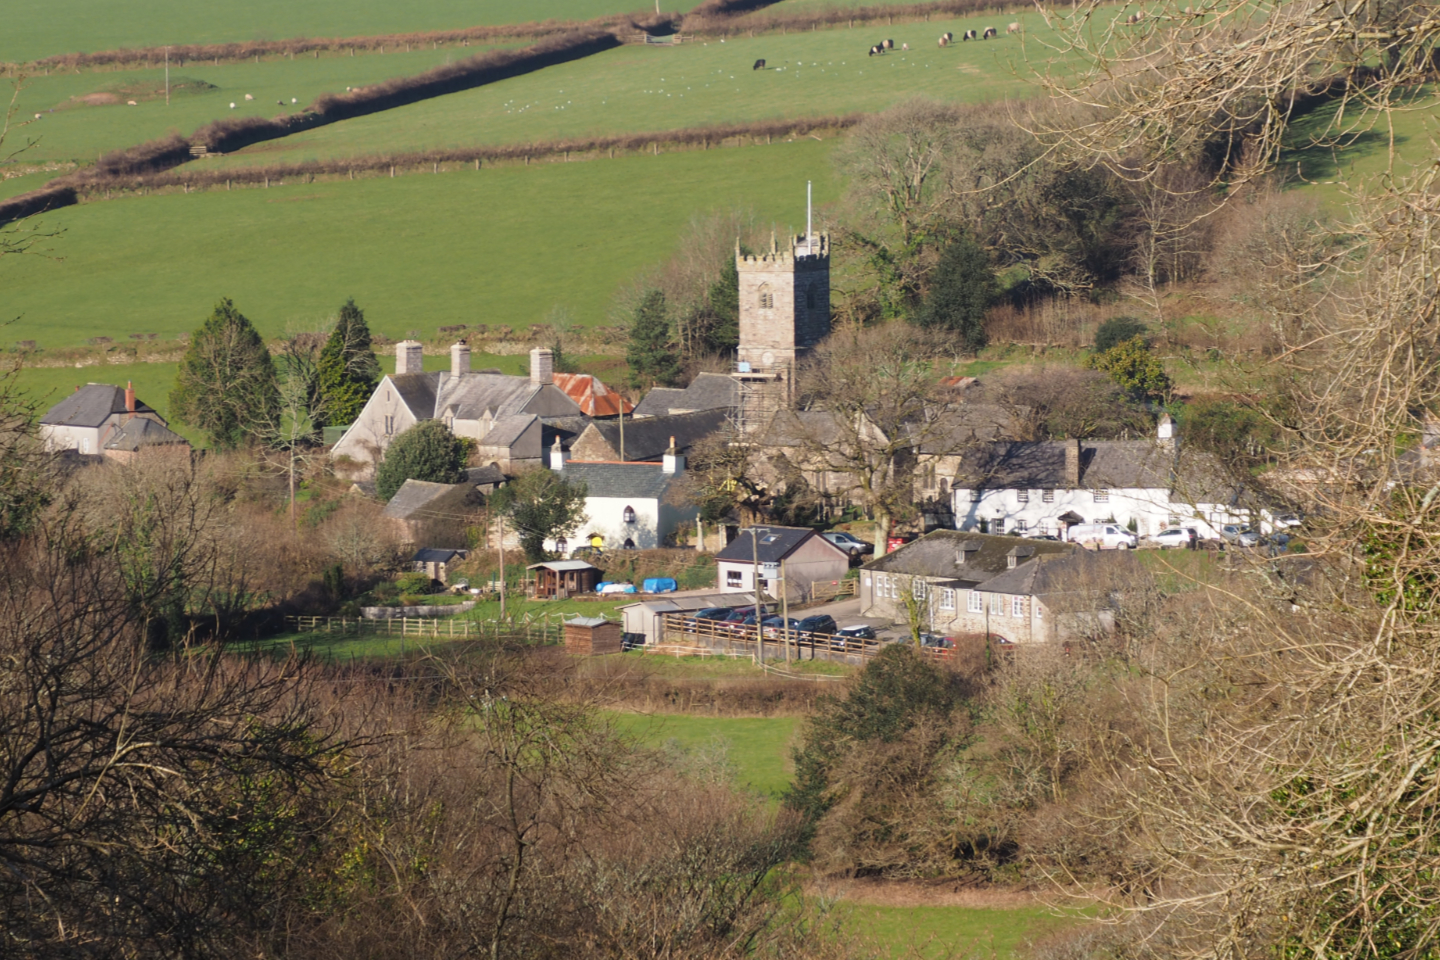 The village of Meavy on the south west edge of Dartmoor